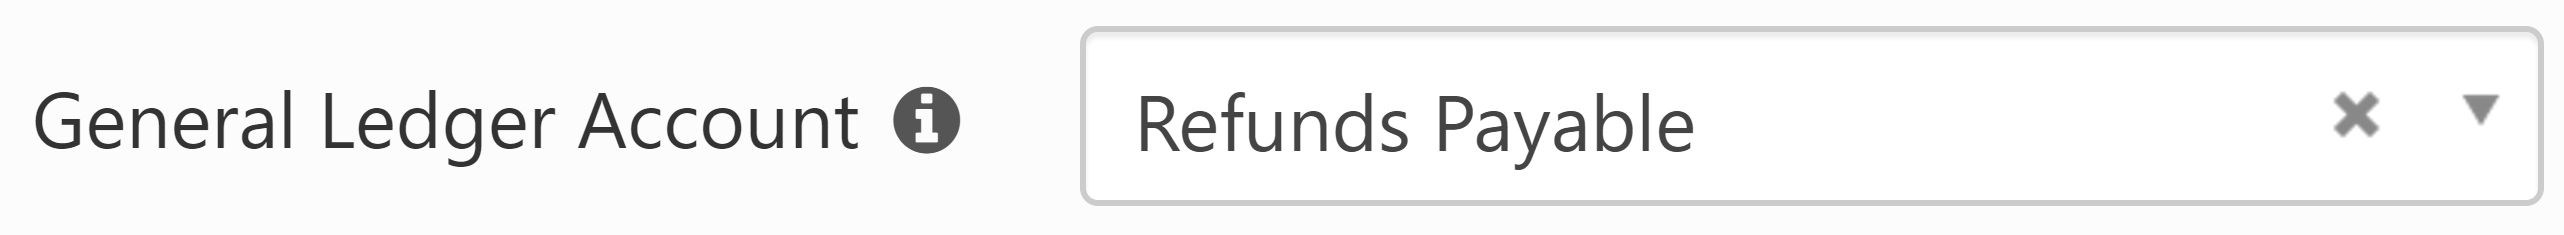 general-ledger-account-refunds-payable.png